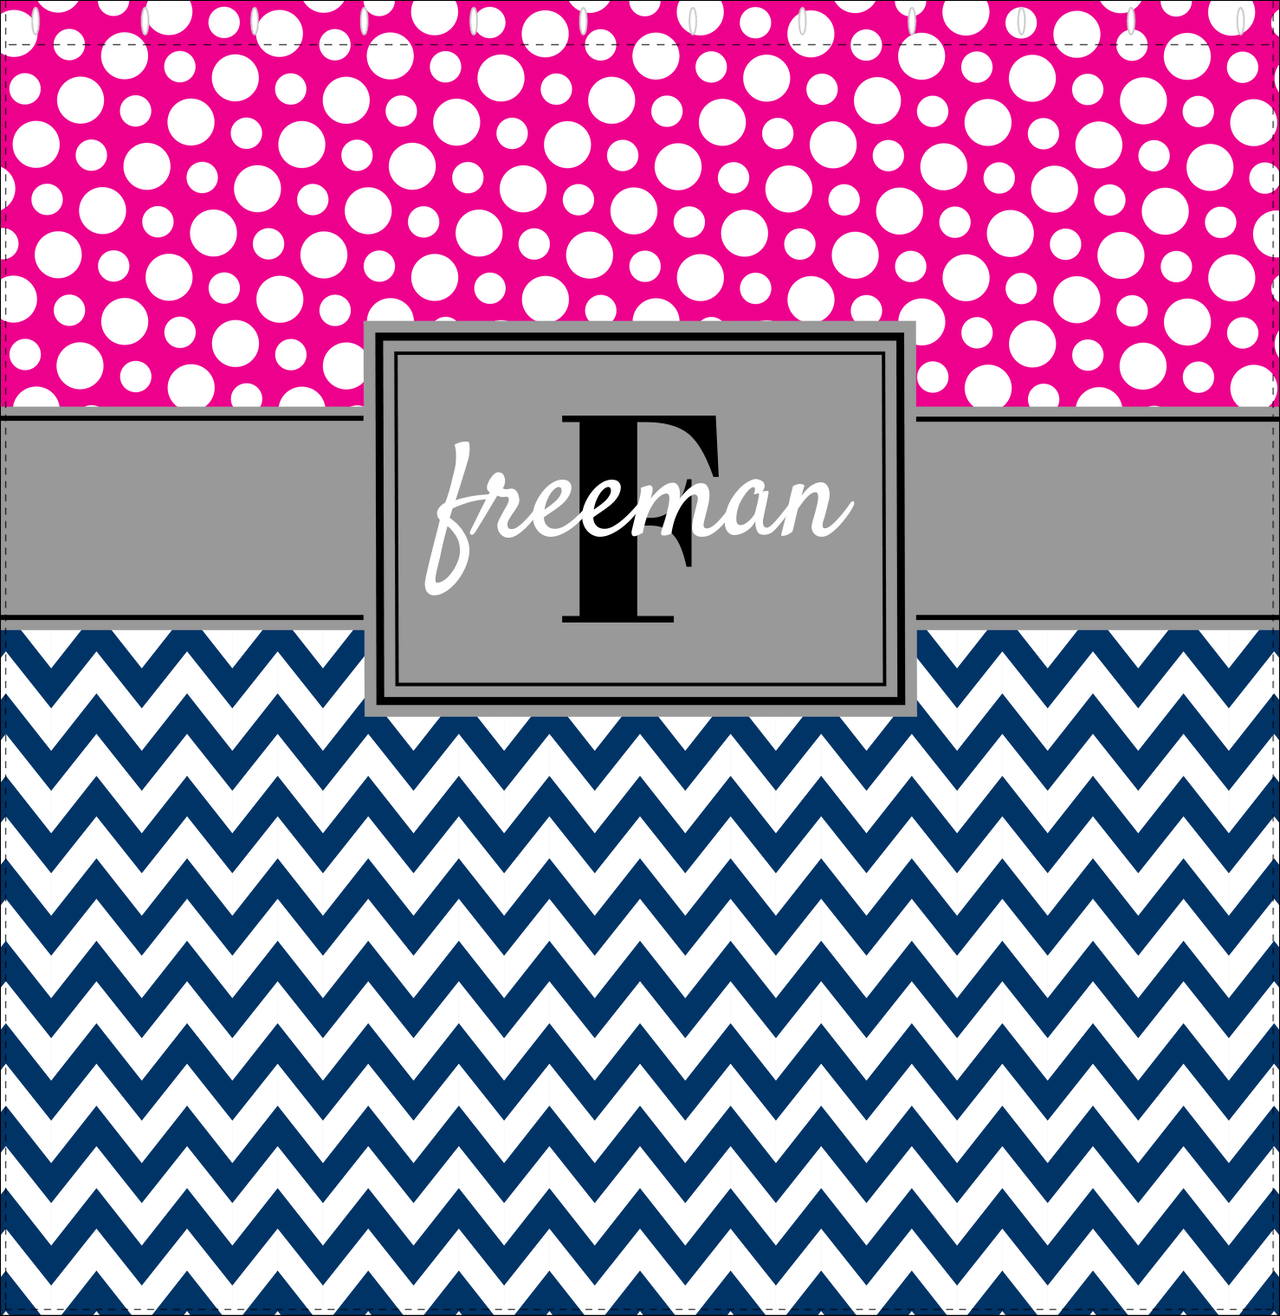 Personalized Polka Dots and Chevron I Shower Curtain - Pink and Navy - Rectangle Nameplate - Decorate View